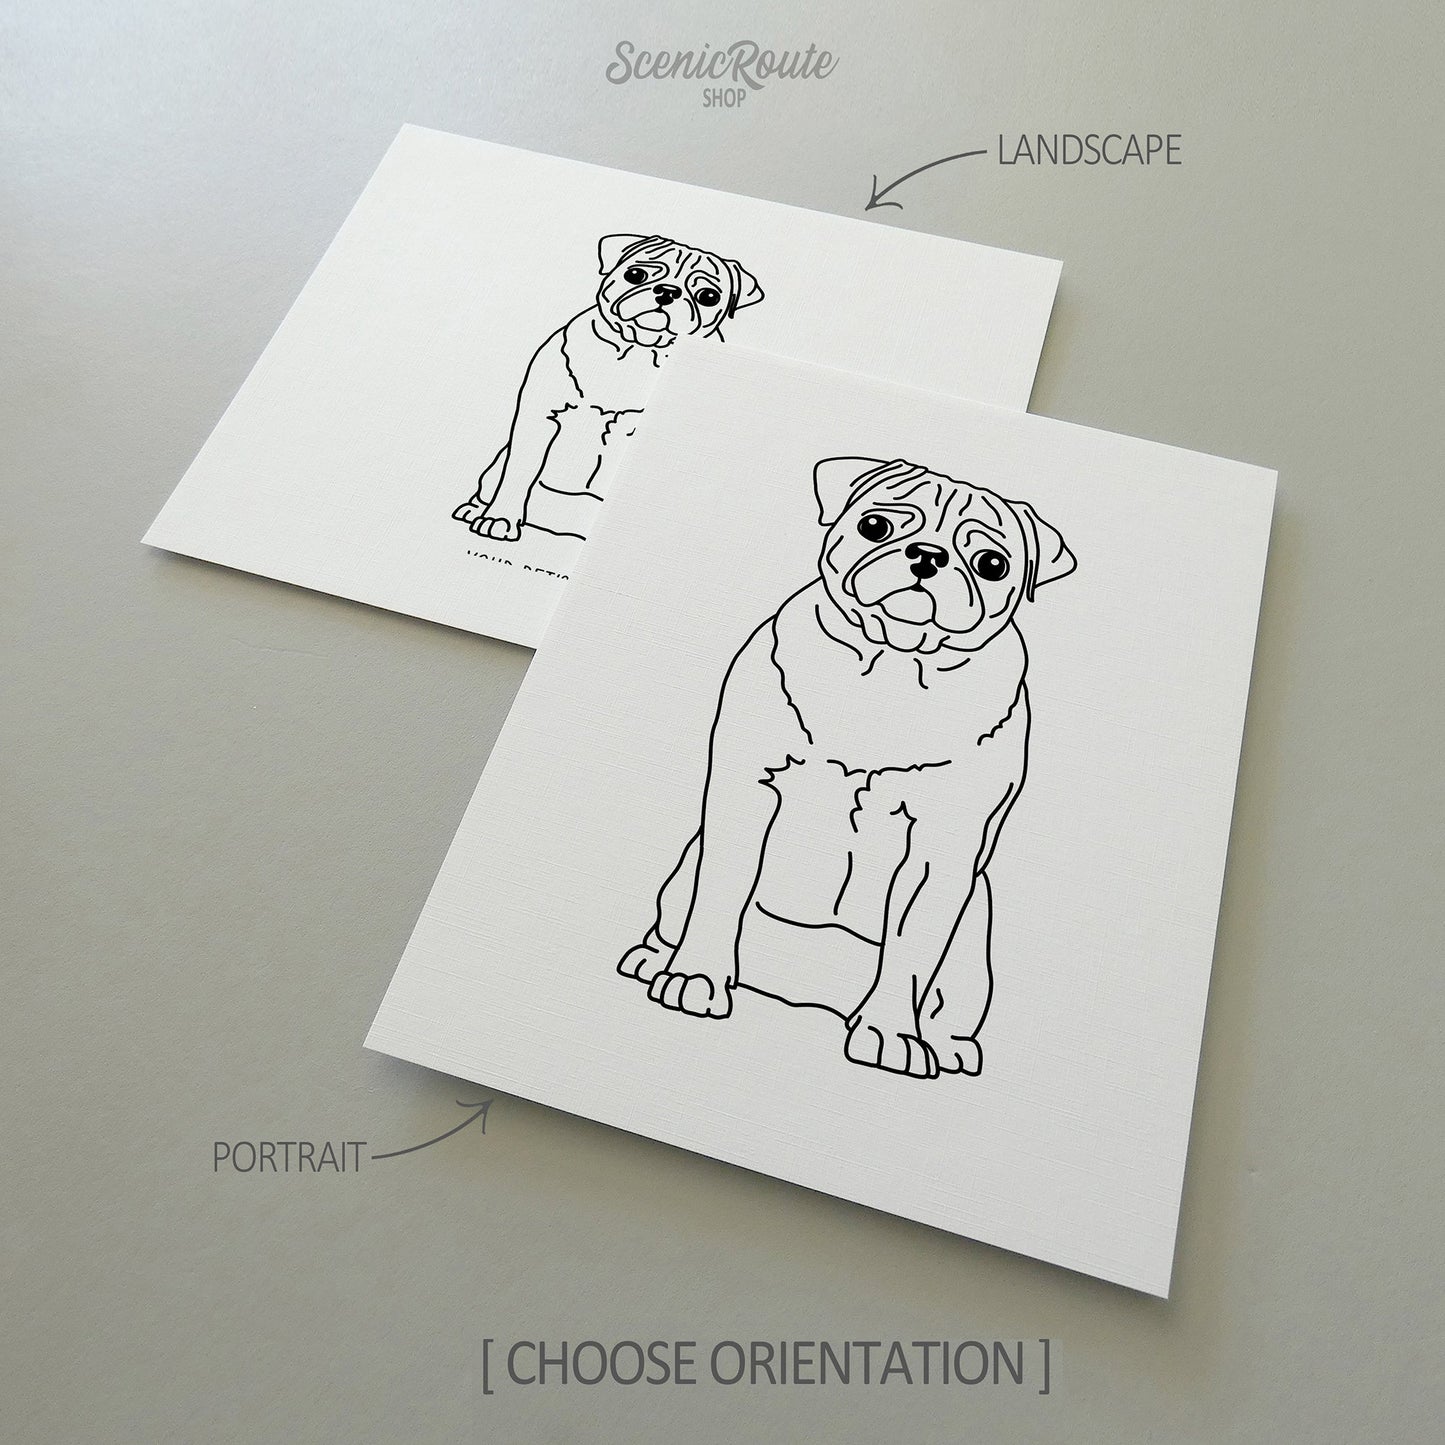 Two line art drawings of a Pug dog on white linen paper with a gray background.  The pieces are shown in portrait and landscape orientation for the available art print options.